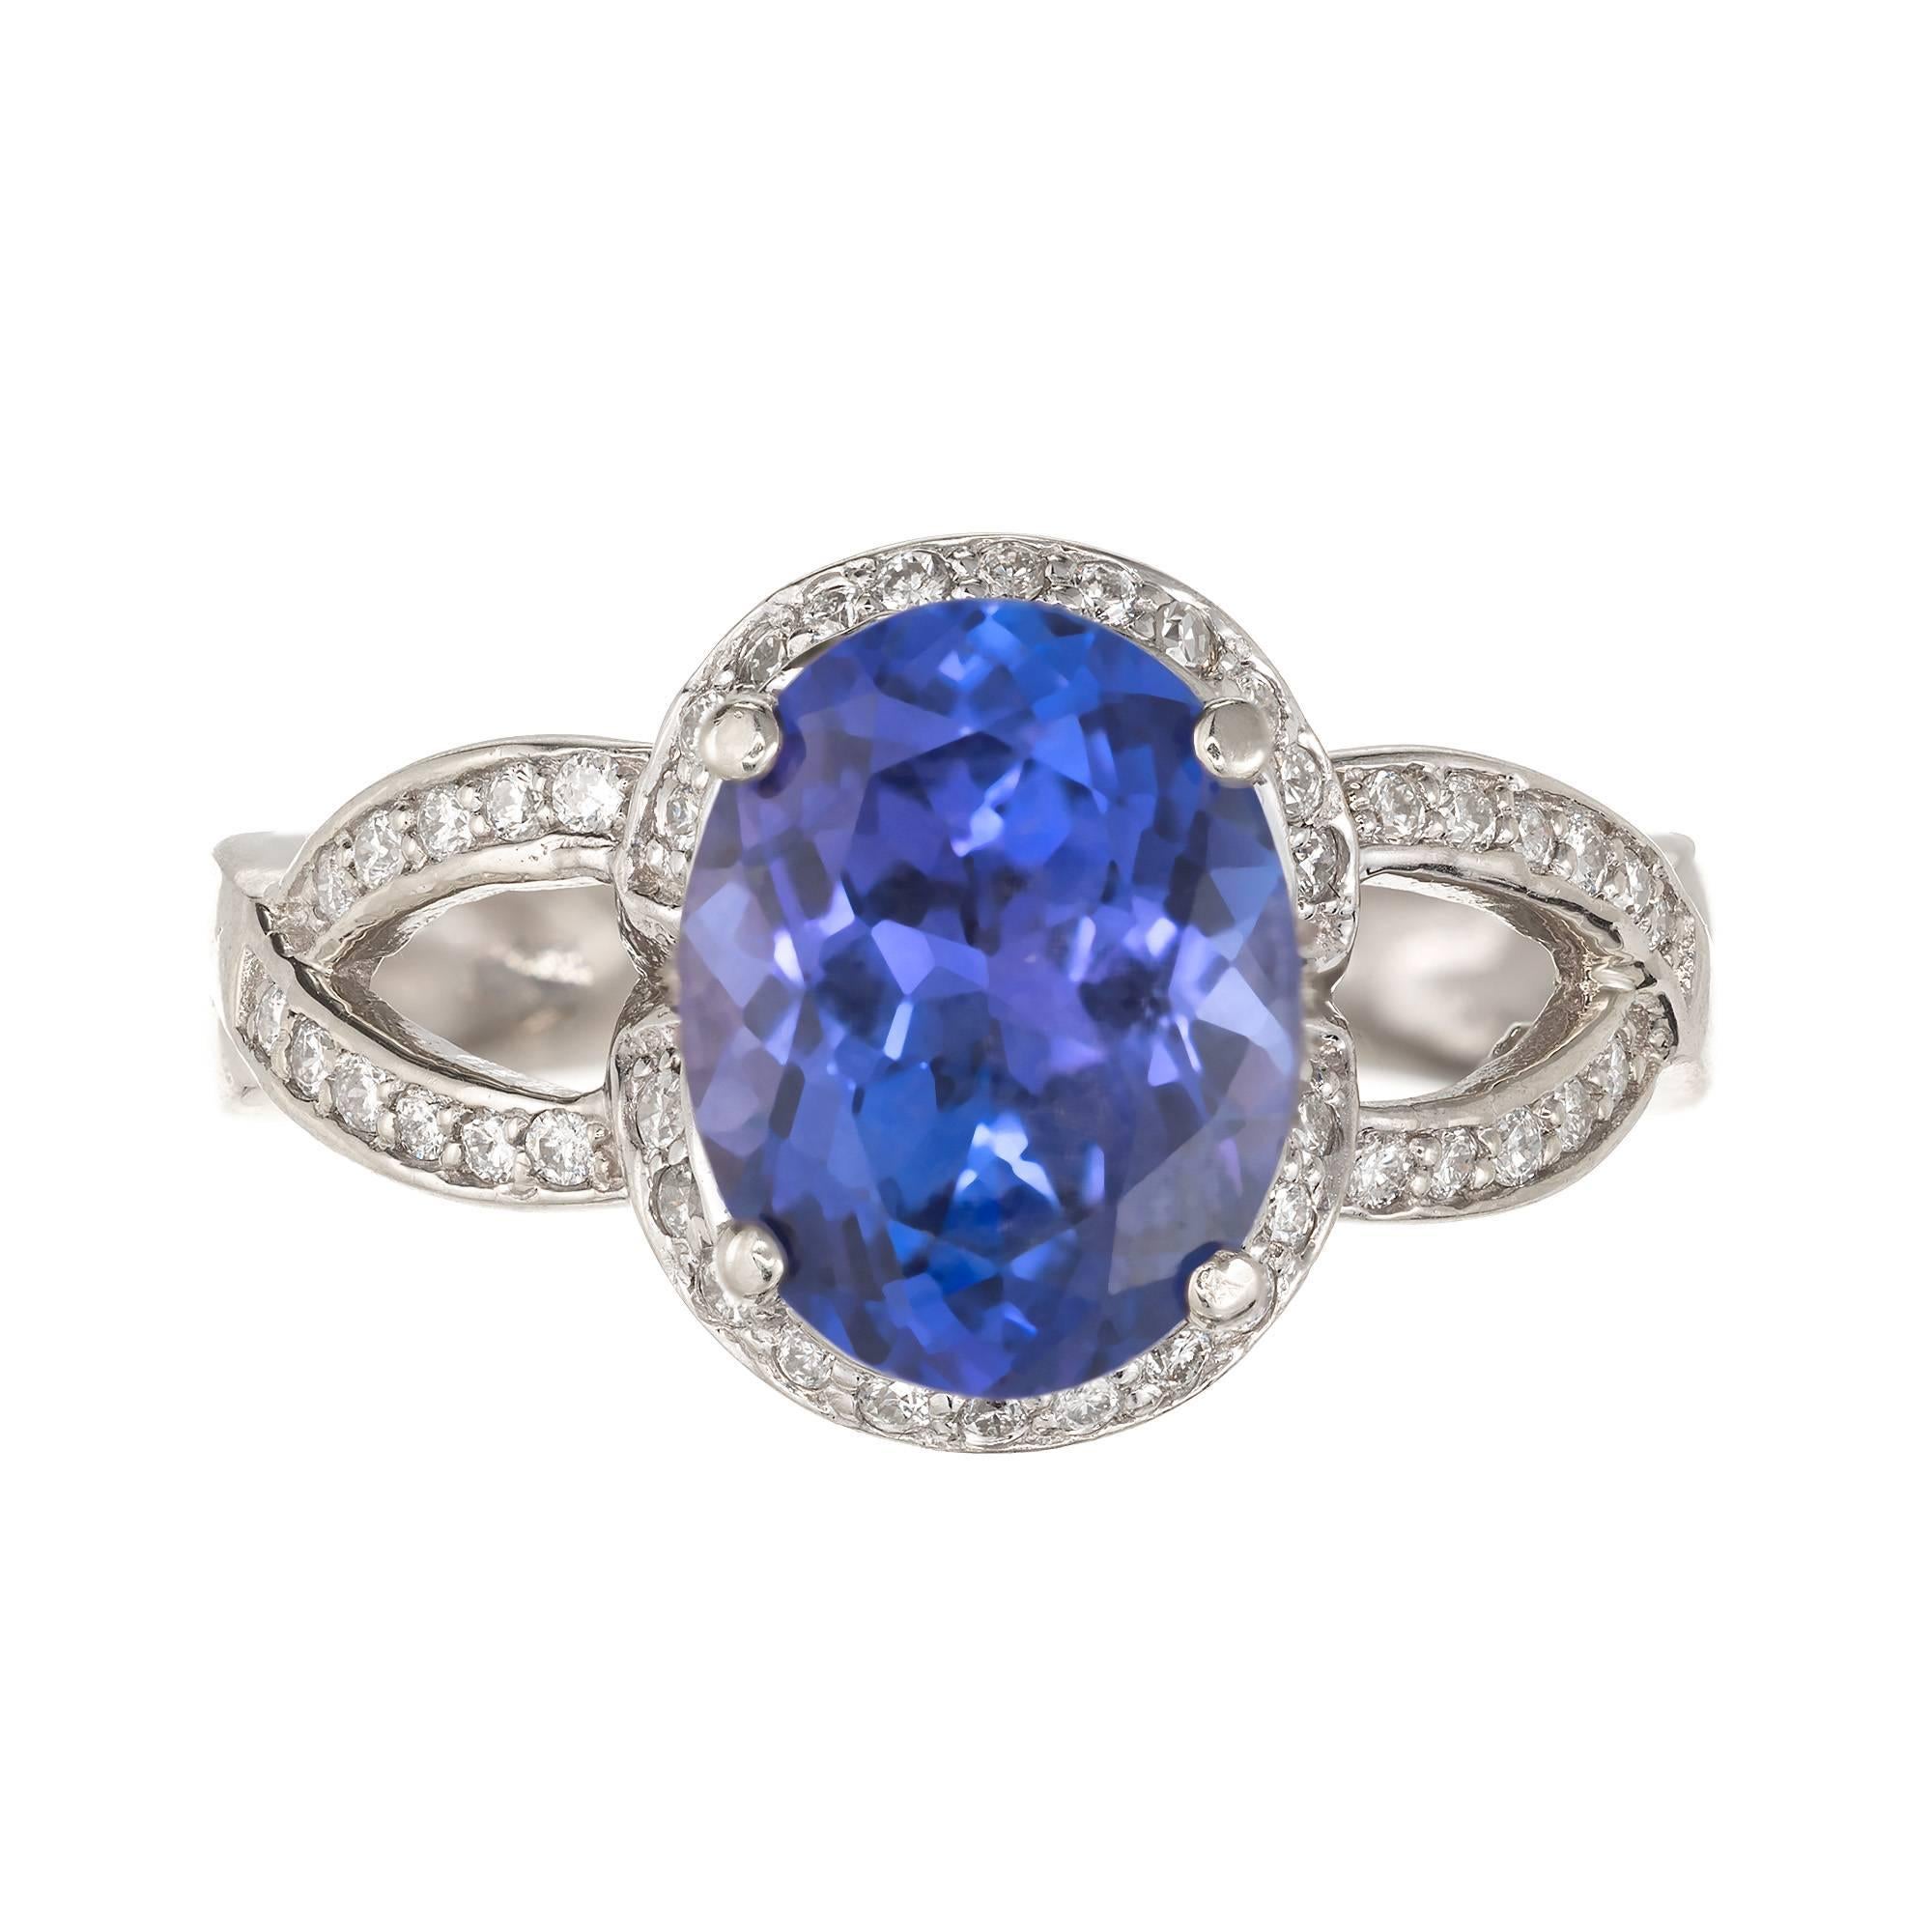 Oval Well-polished 3.14ct Tanzanite and diamond cocktail ring. 14k white gold setting with oval Tanzanite center stone, surrounded by a halo of diamonds. 

1 oval violet blue Tanzanite, approx. total weight 3.14cts, VS2, 10.80 x 8.30 x 5.45mm, GIA